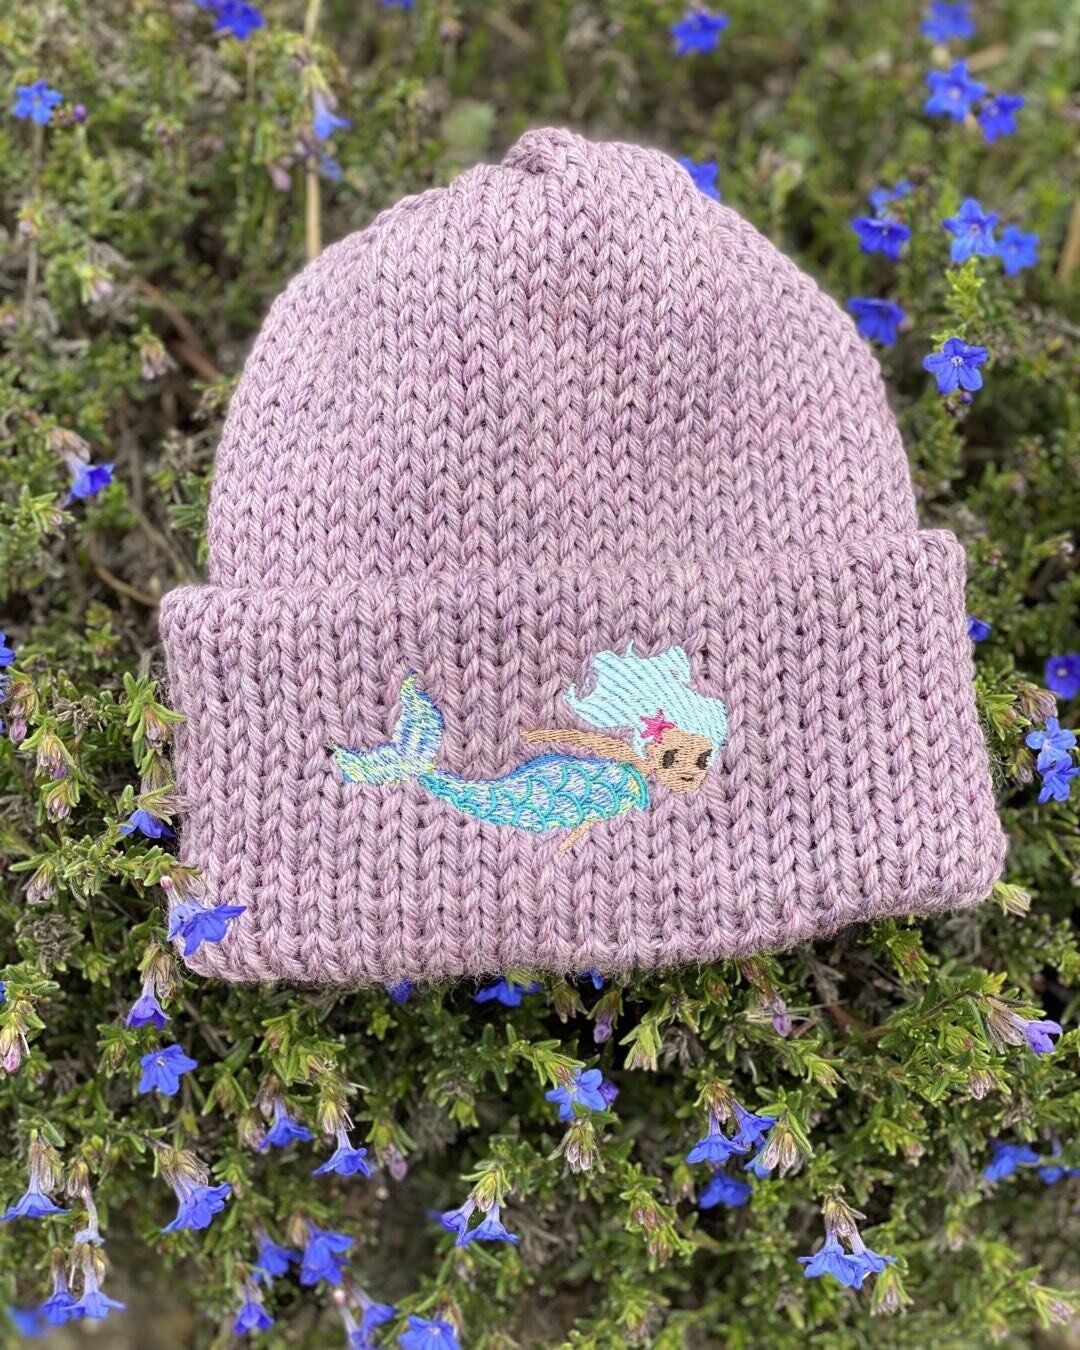 Channeling our inner mermaid with this fabulous beanie! 🧜&zwj;♀️✨ #MermaidVibes #BeanieLove #pacificacalifornia